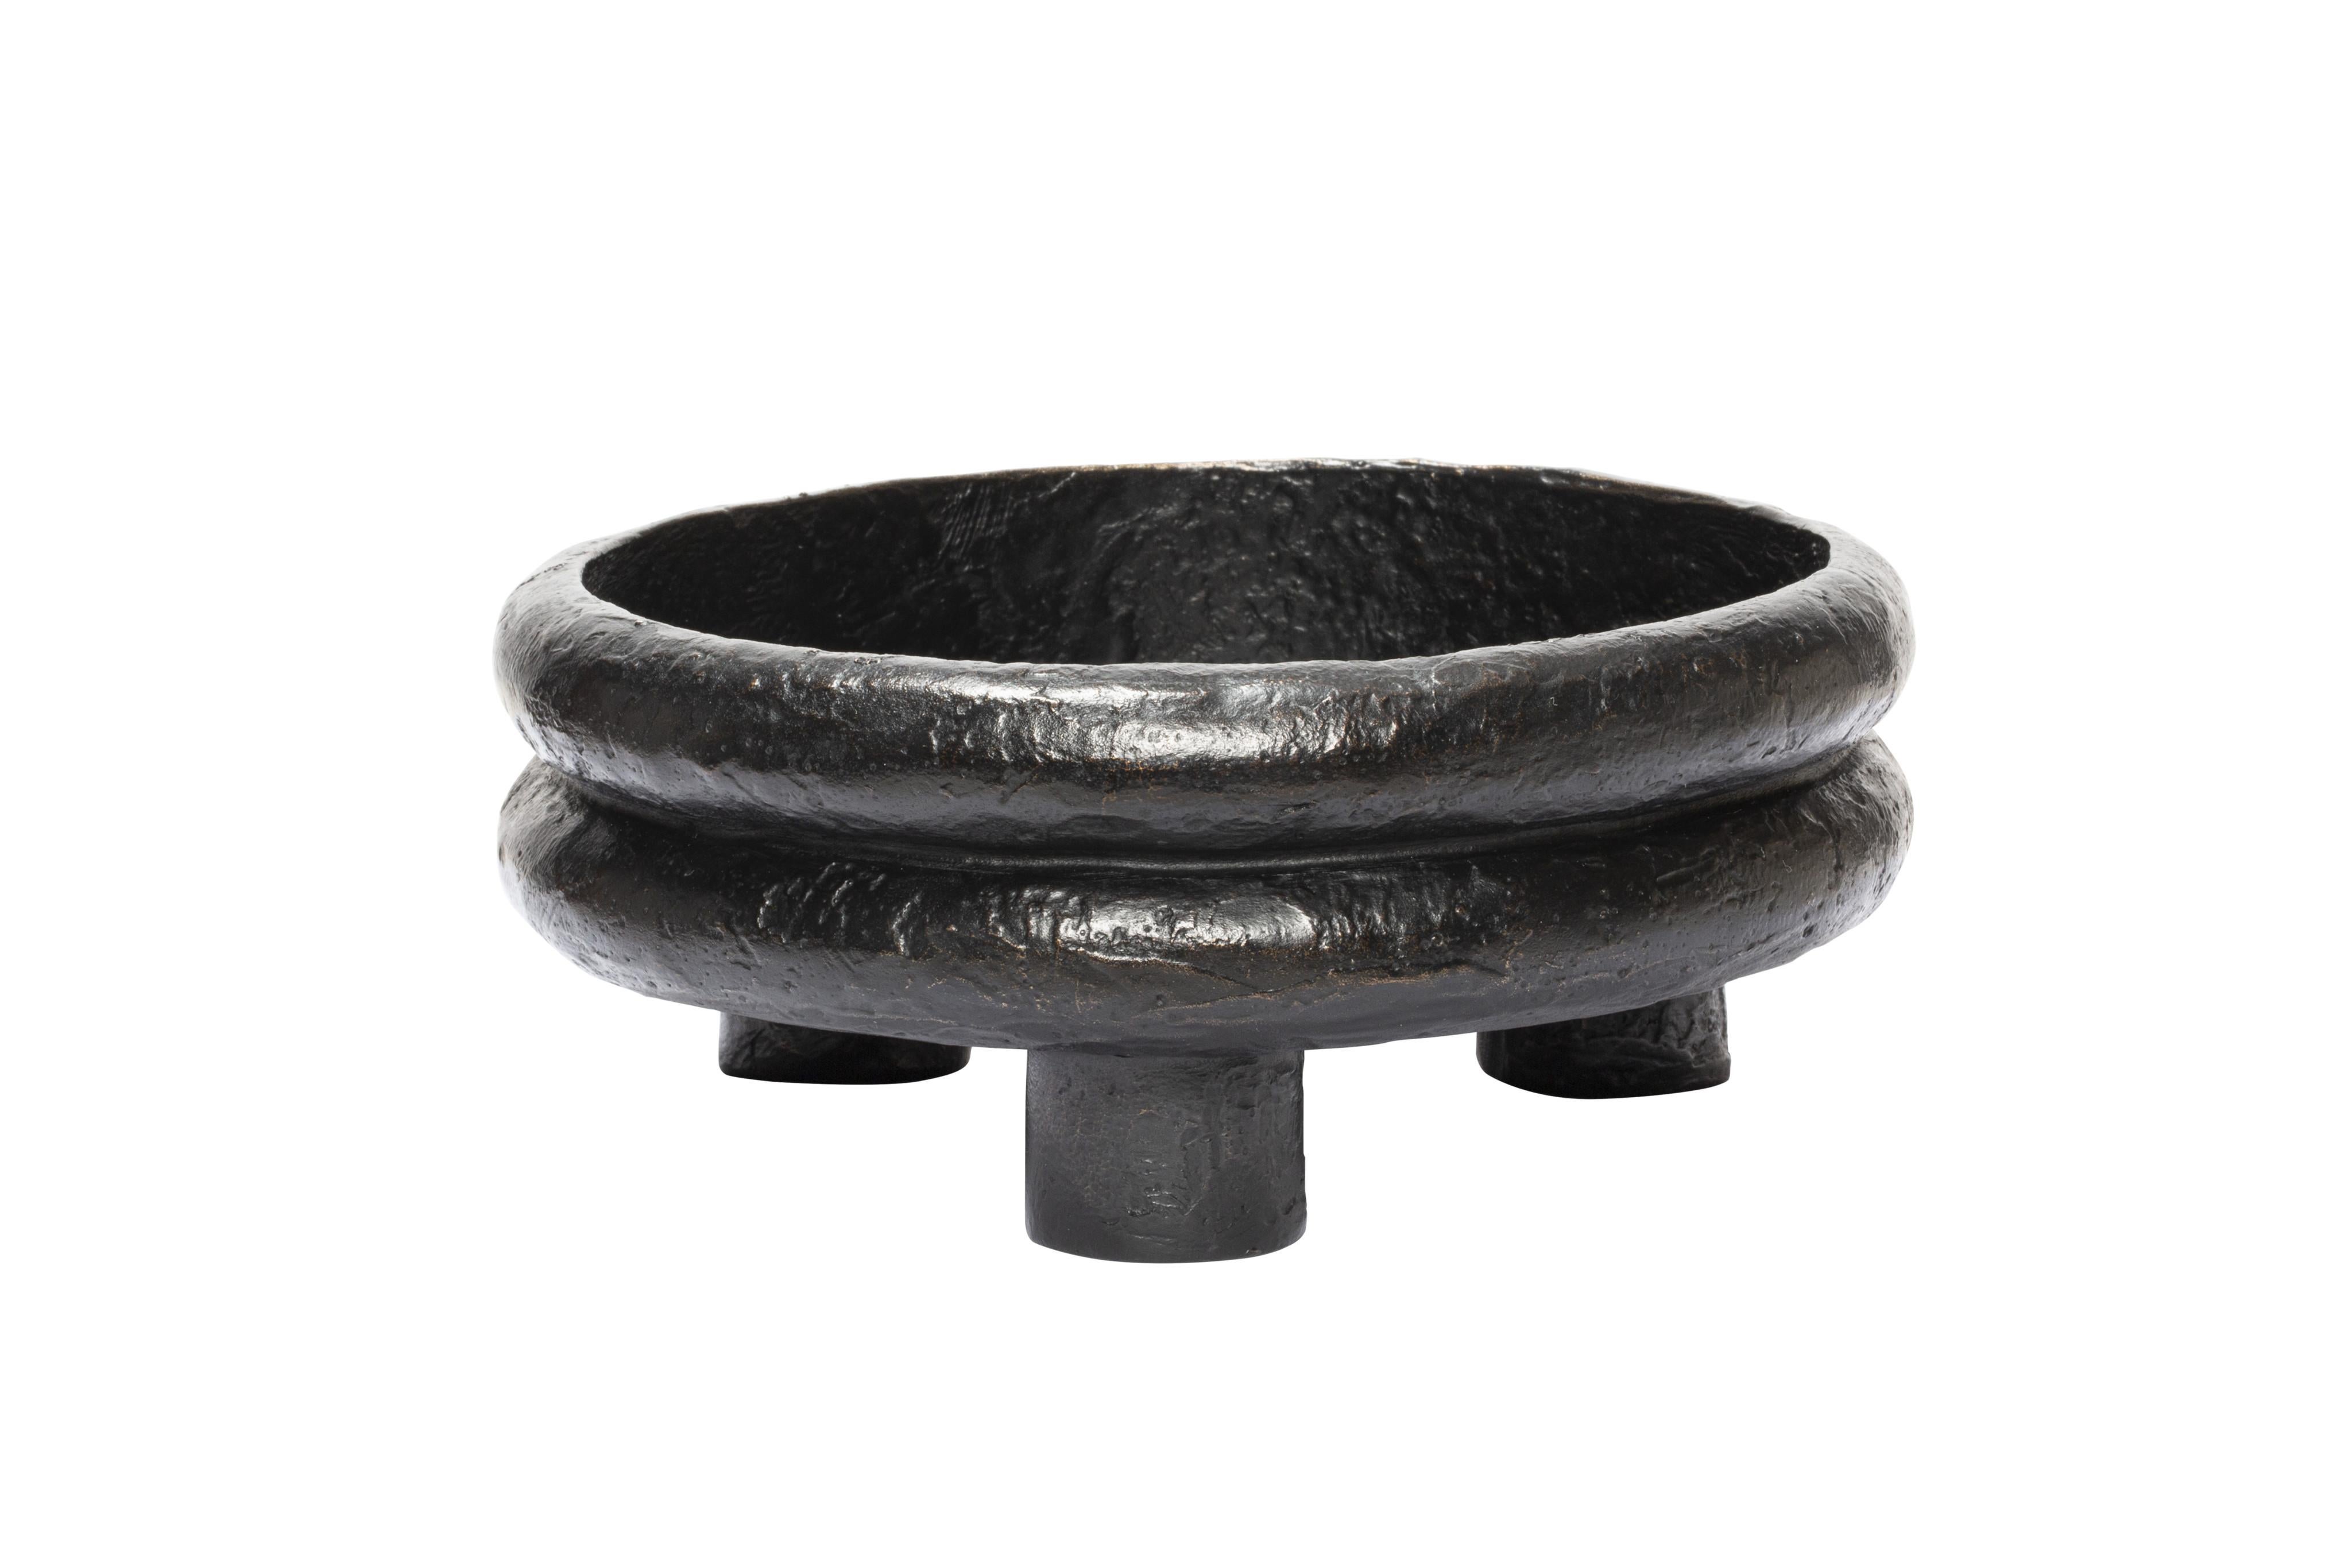 Short Scala Bronze Bowl -- Stephane Parmentier x Giobagnara

Available only in burnished sandblasted bronze, brown or black.

Embracing sleek designs and beautiful materials, the Stephane Parmentier Collection for Giobagnara epitomizes a commitment